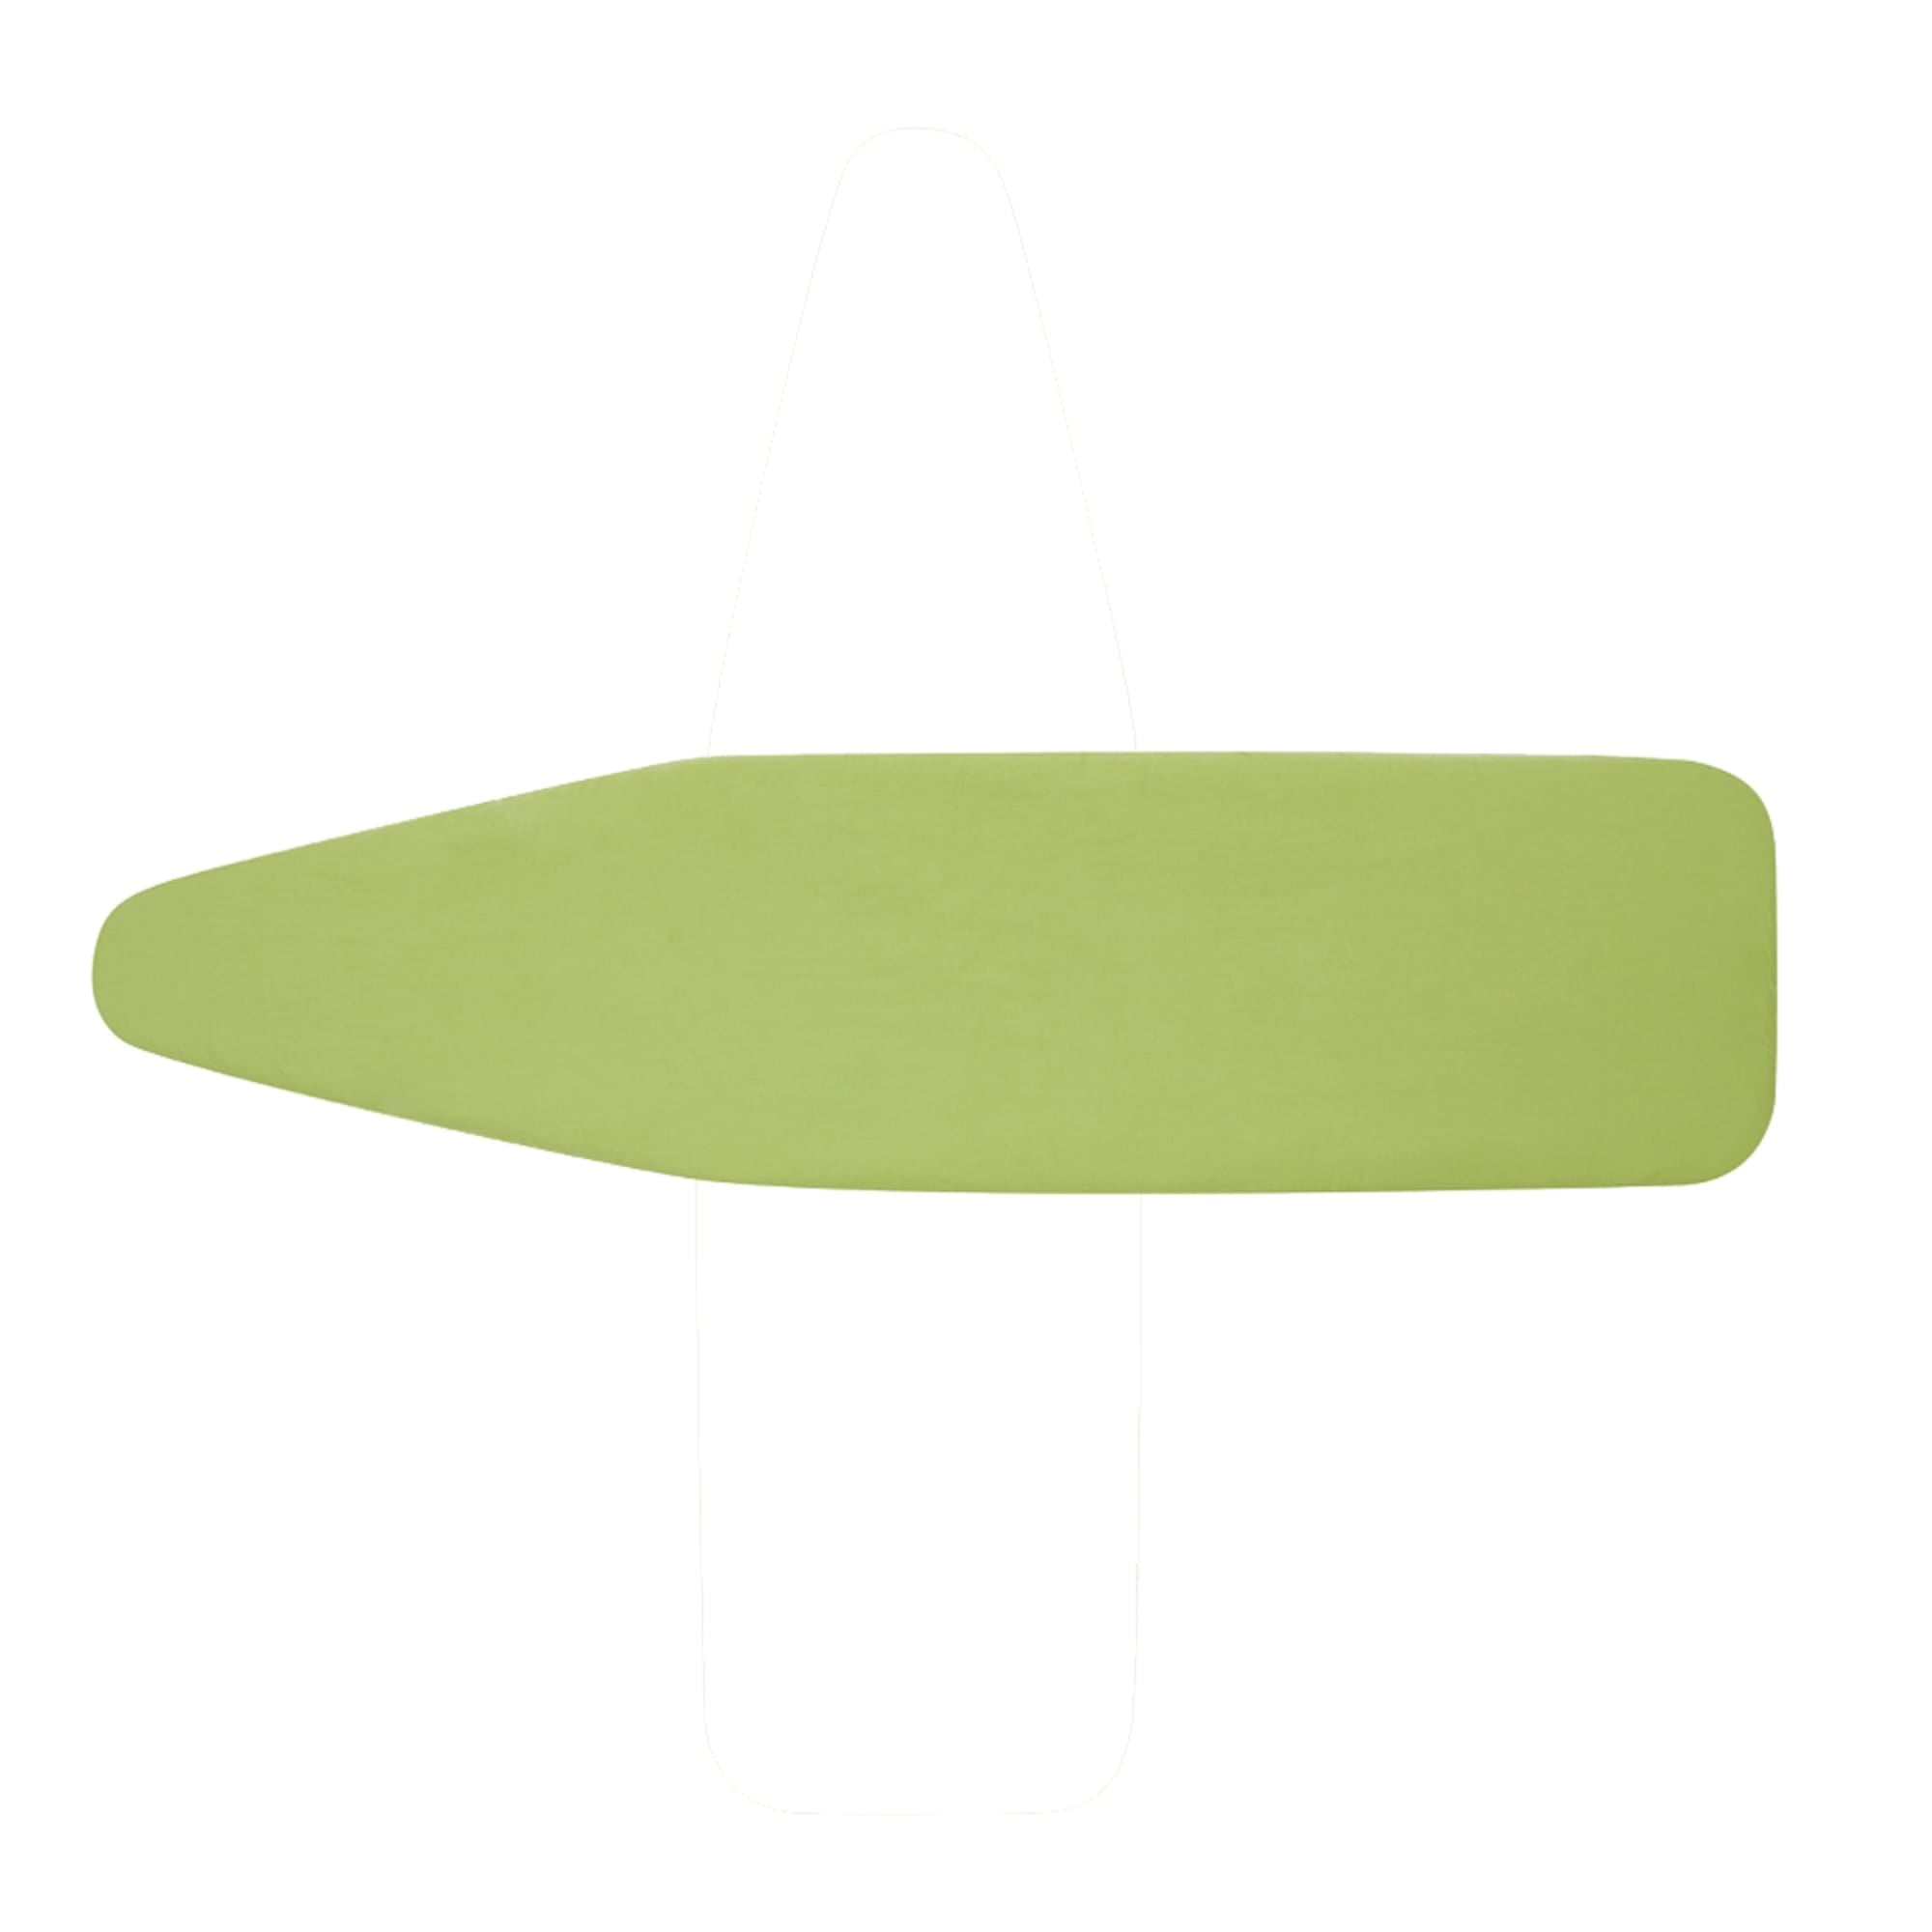 Seymour Home Products Premium Replacement Cover and Pad, Sage Green, Fits 53"-54" X 13"-14" $8.00 EACH, CASE PACK OF 6